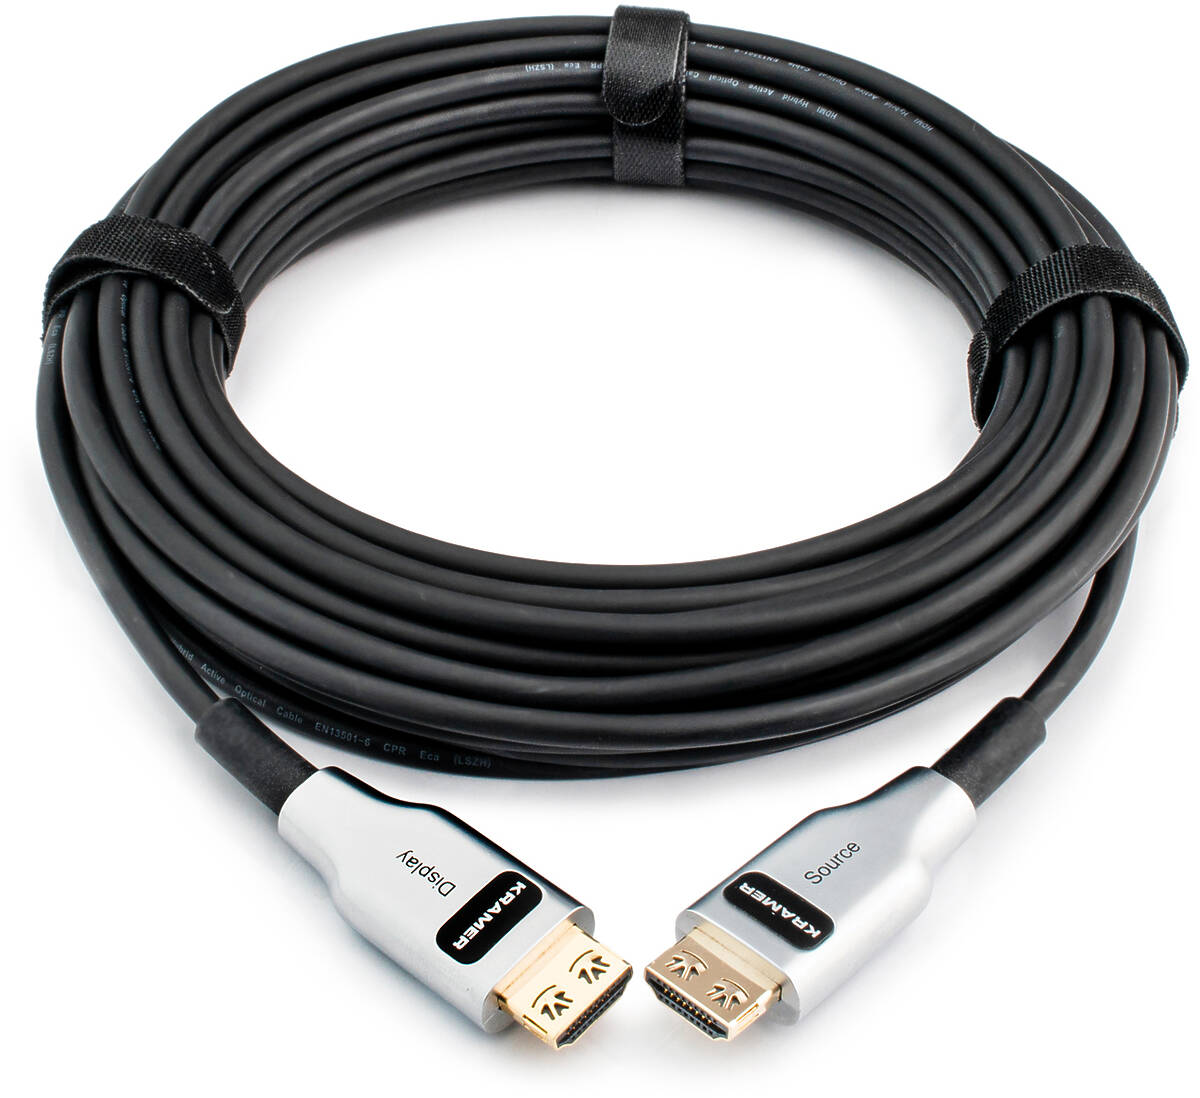 CLS-AOCH/60F-50 15.20m Kramer CLS-AOCH/60F cable product image. Click to enlarge.